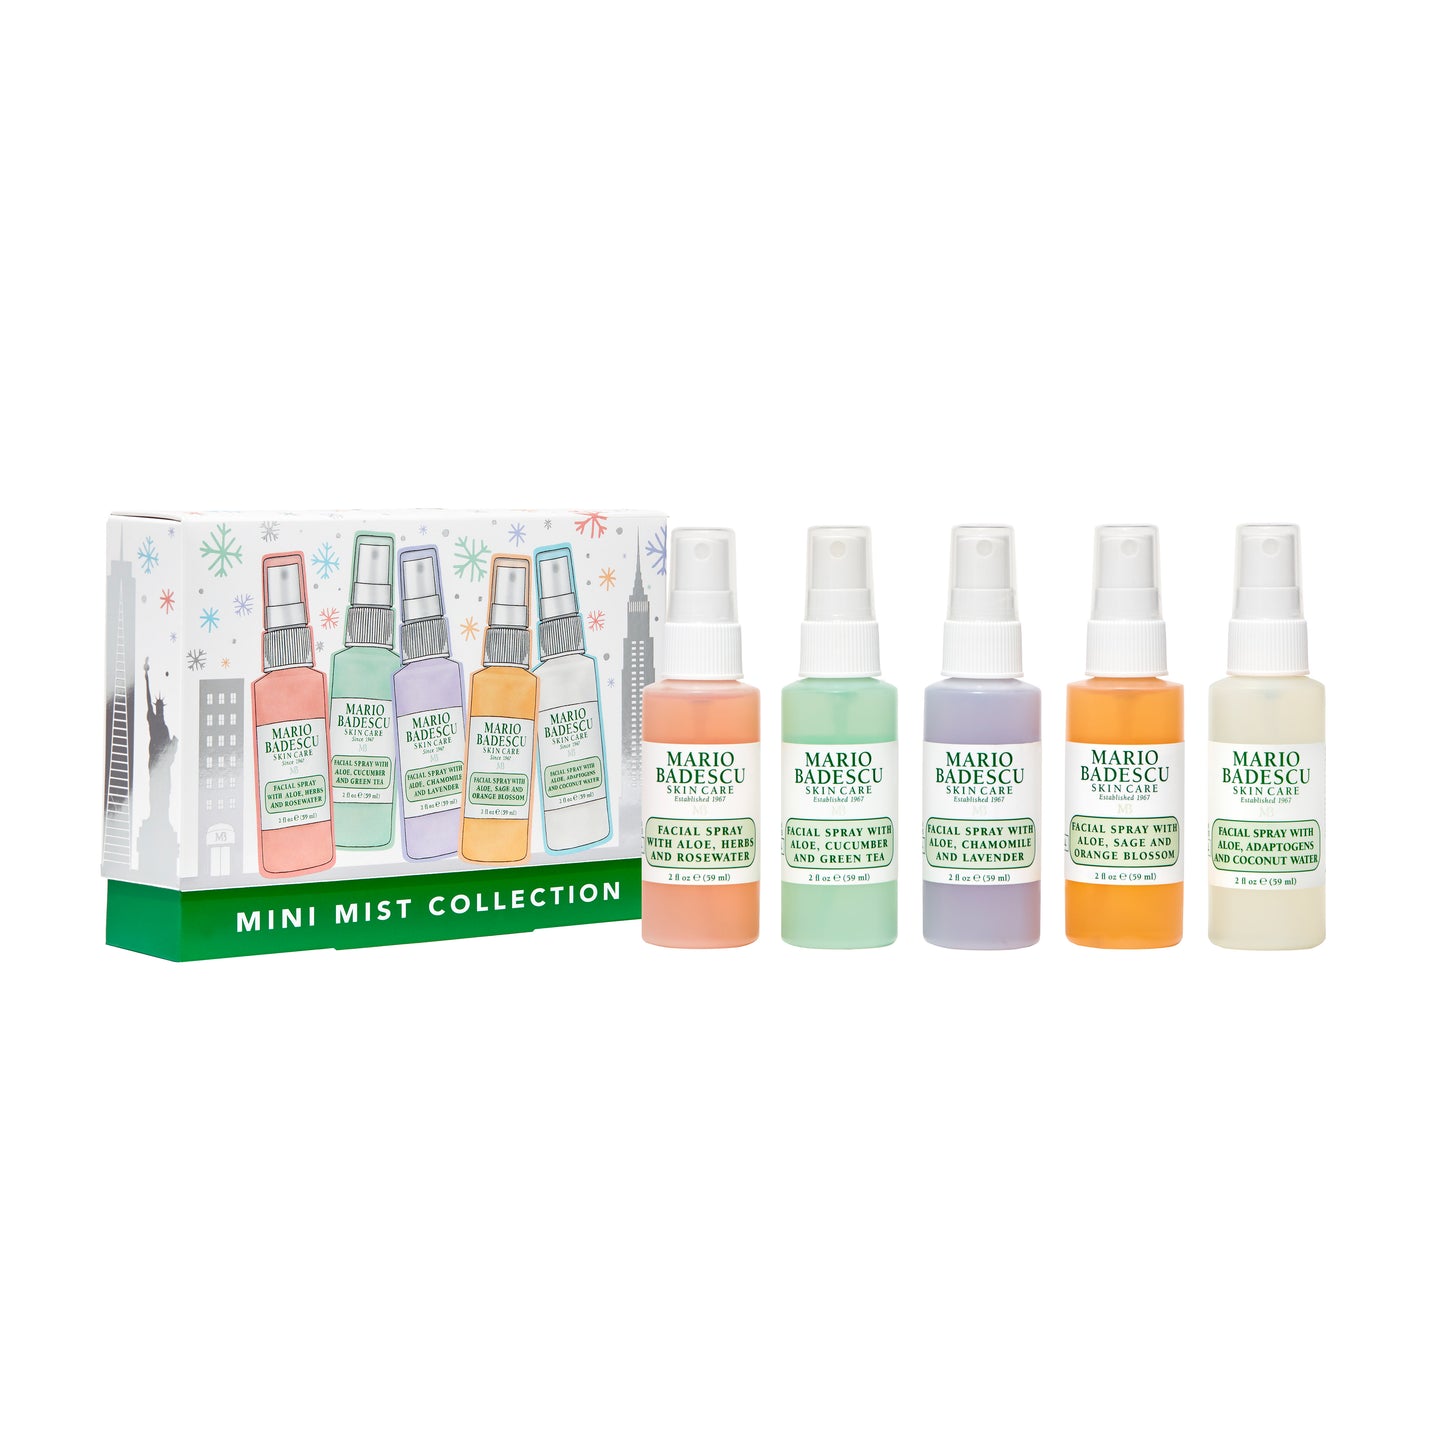 Mini Mist Holiday Collection